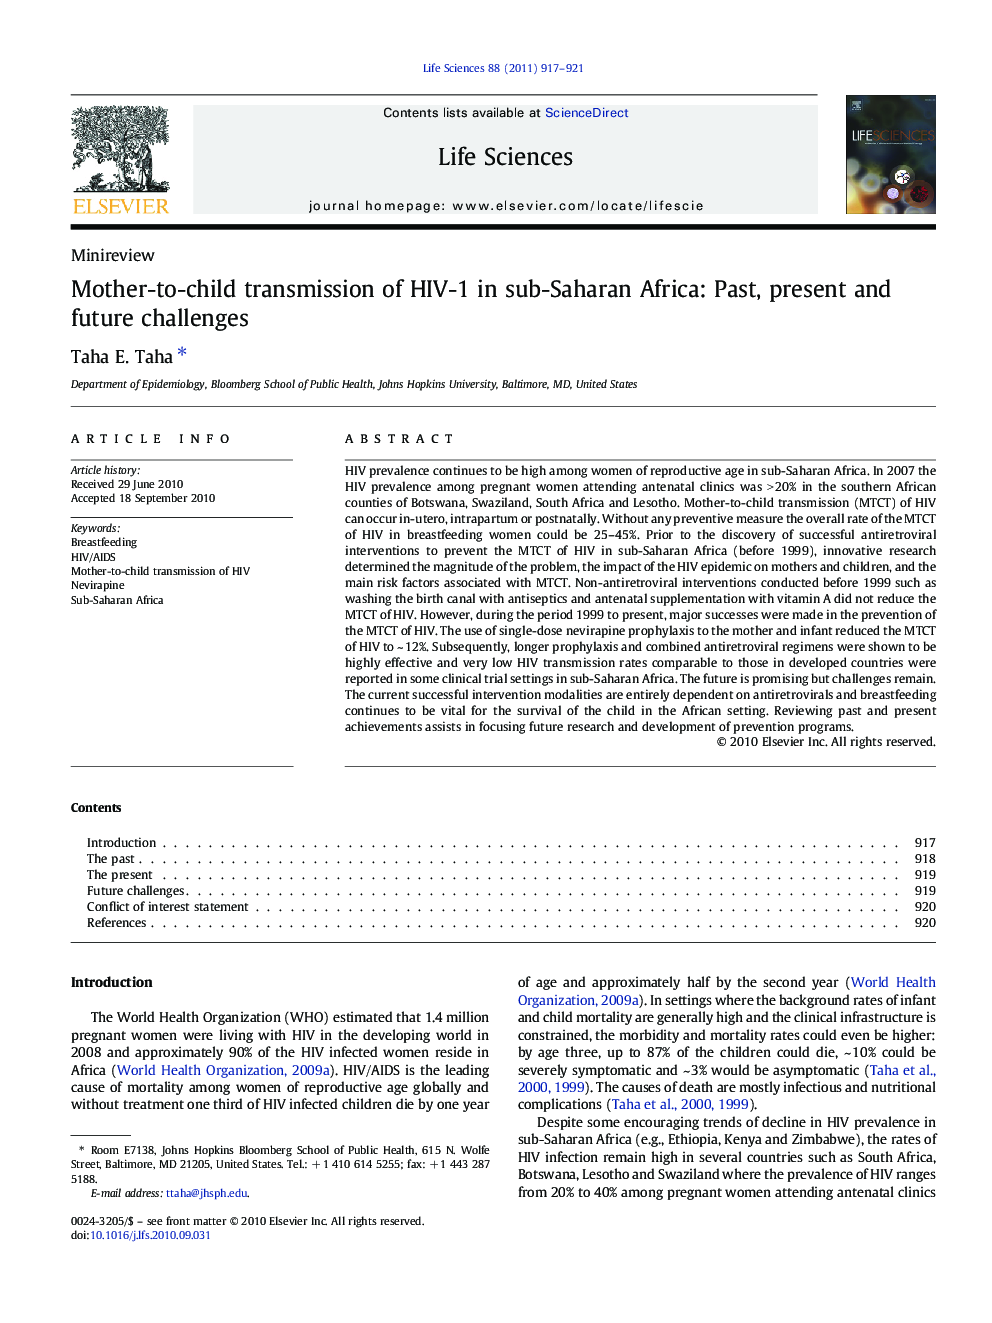 Mother-to-child transmission of HIV-1 in sub-Saharan Africa: Past, present and future challenges